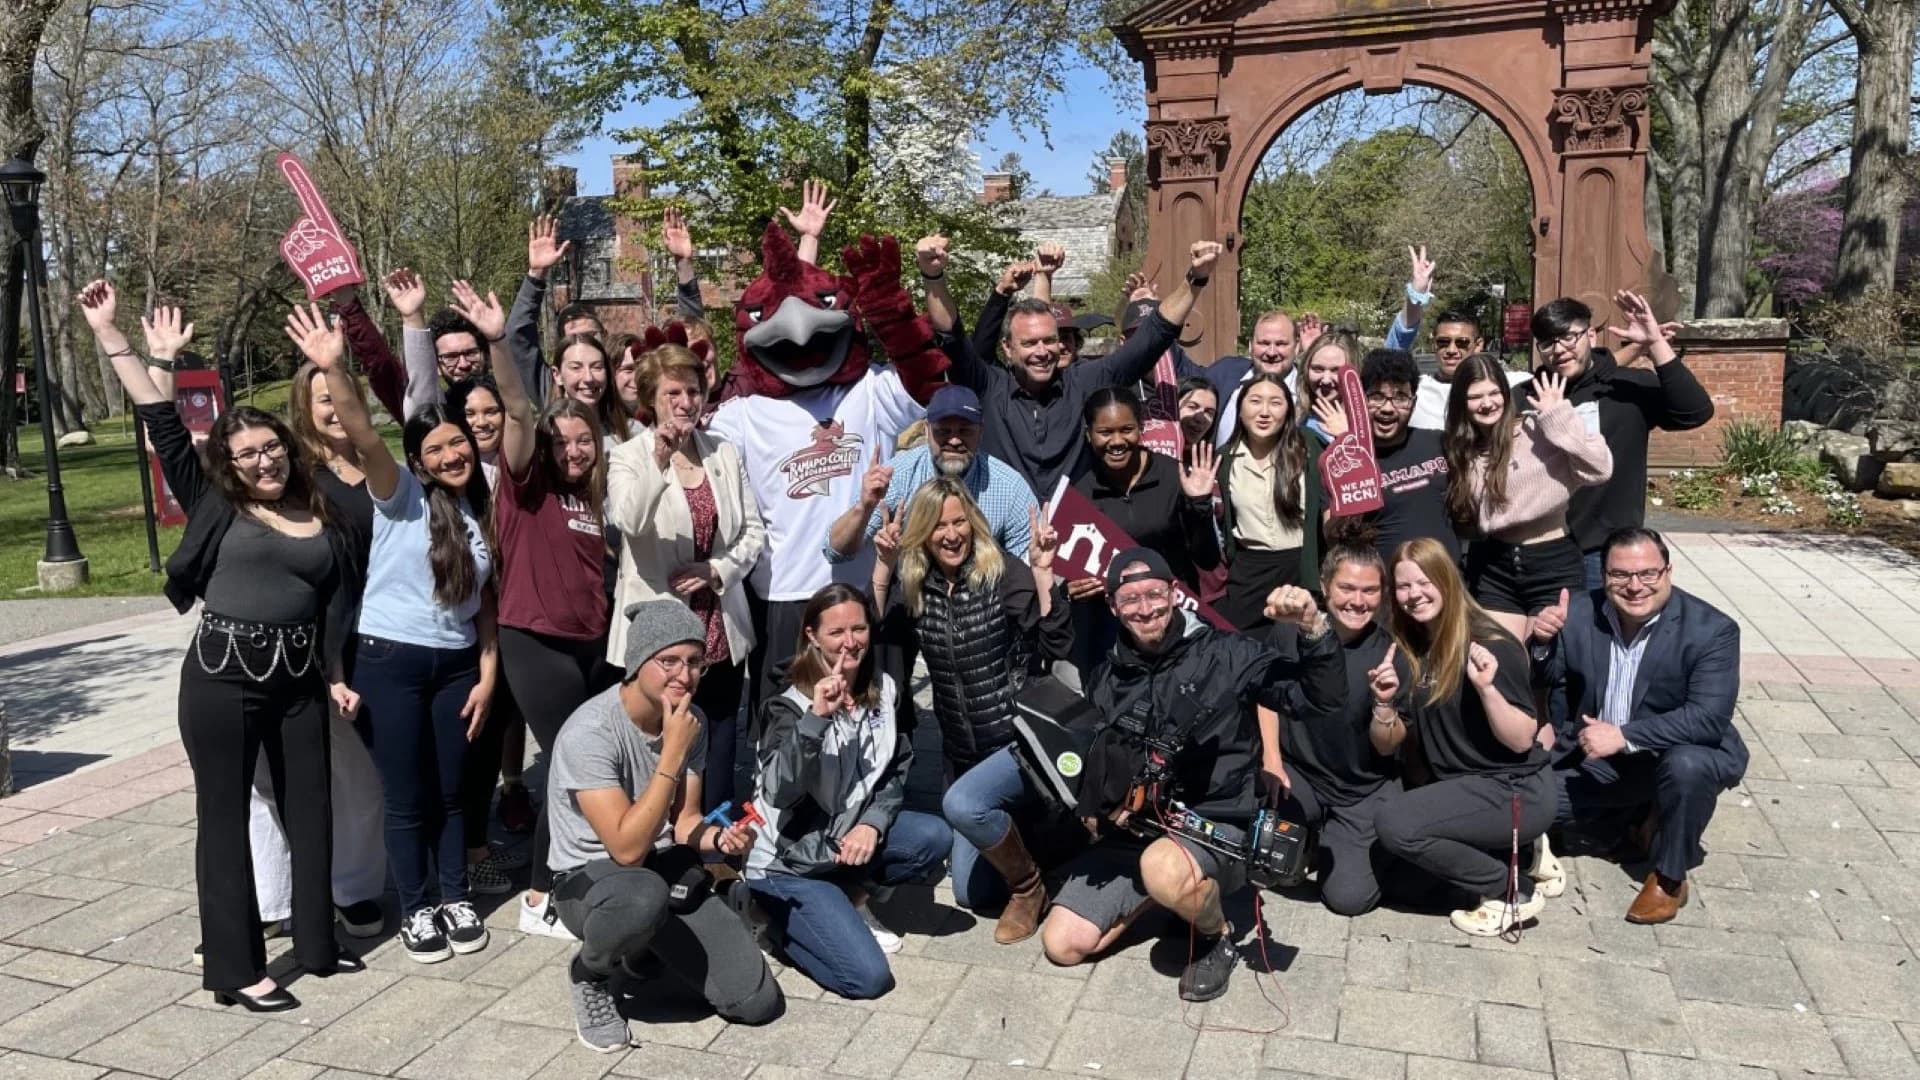 Ramapo College to be featured in Amazon Prime TV series